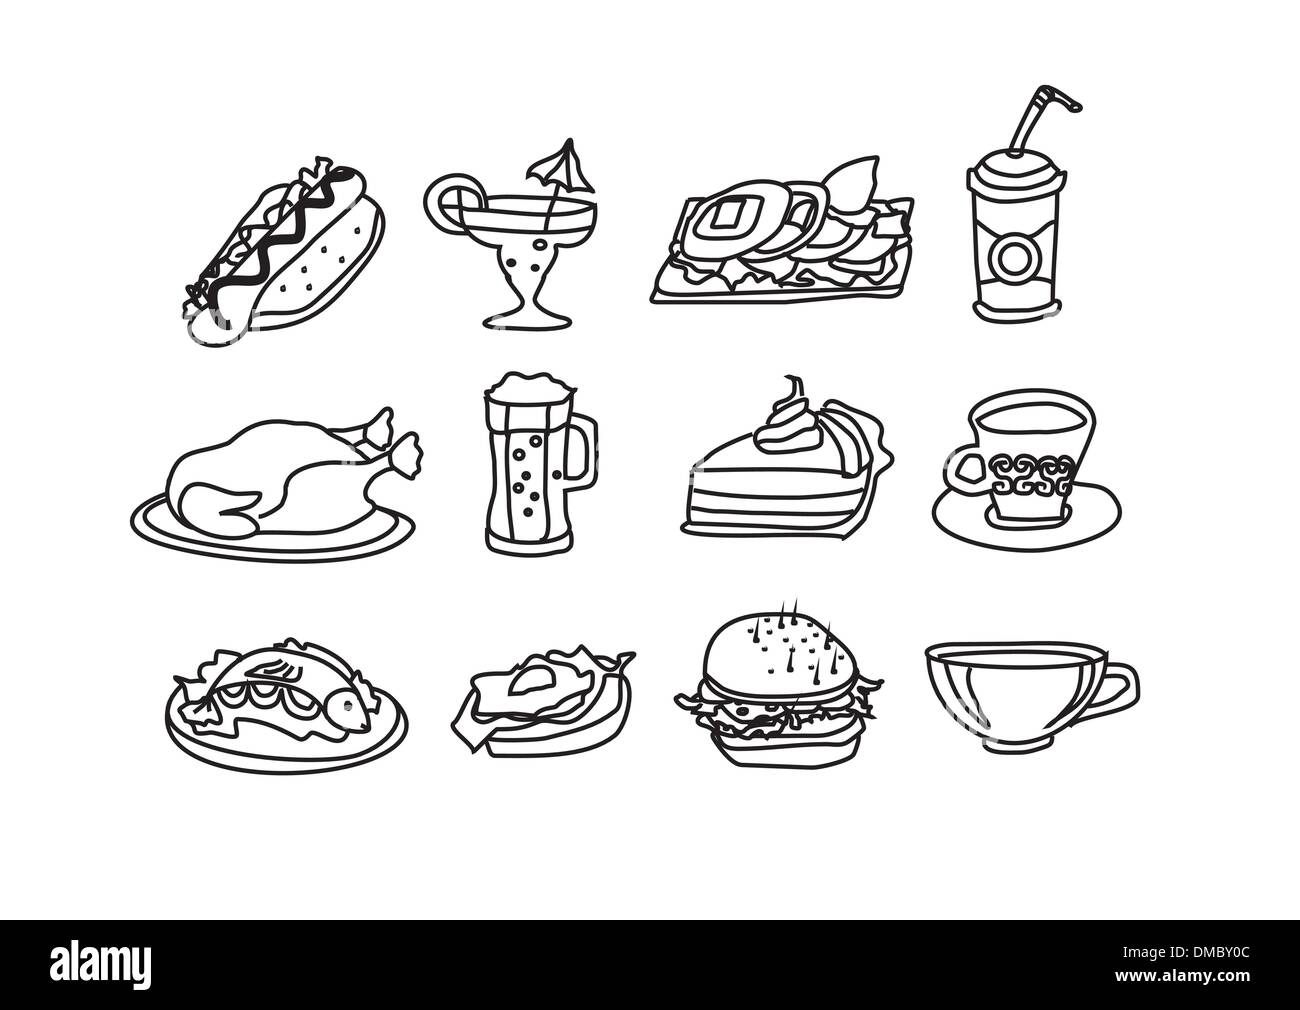 Food Icon doodles Set Stock Vector